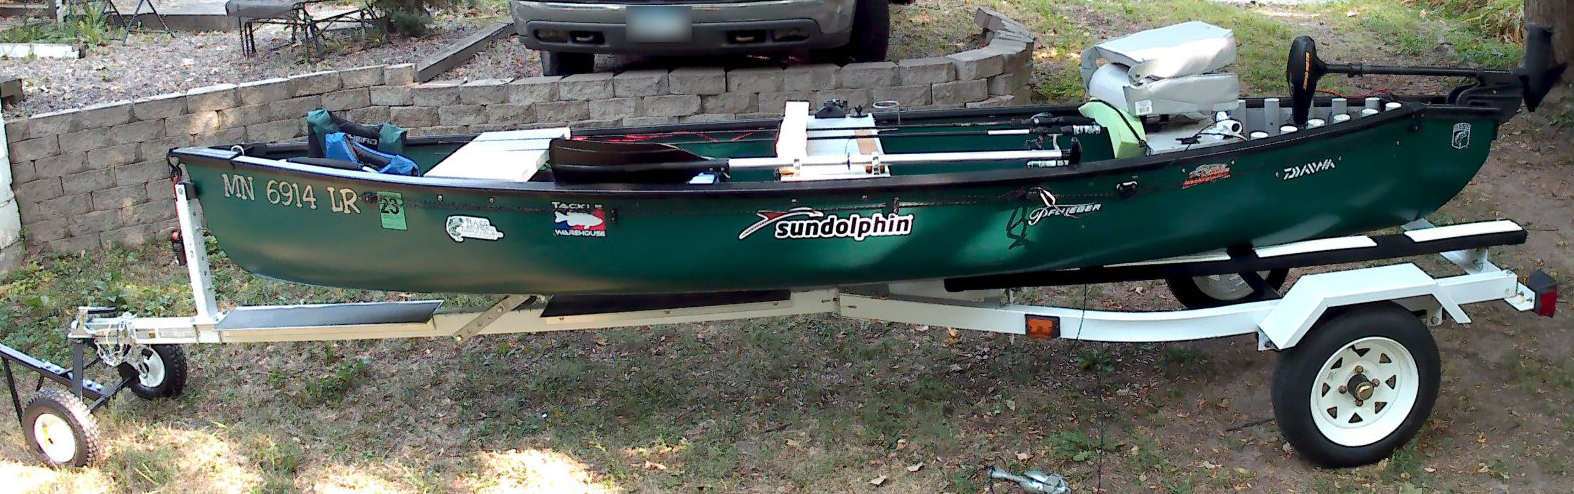 Install trolling motor on kayak? - Bass Boats, Canoes, Kayaks and more -  Bass Fishing Forums